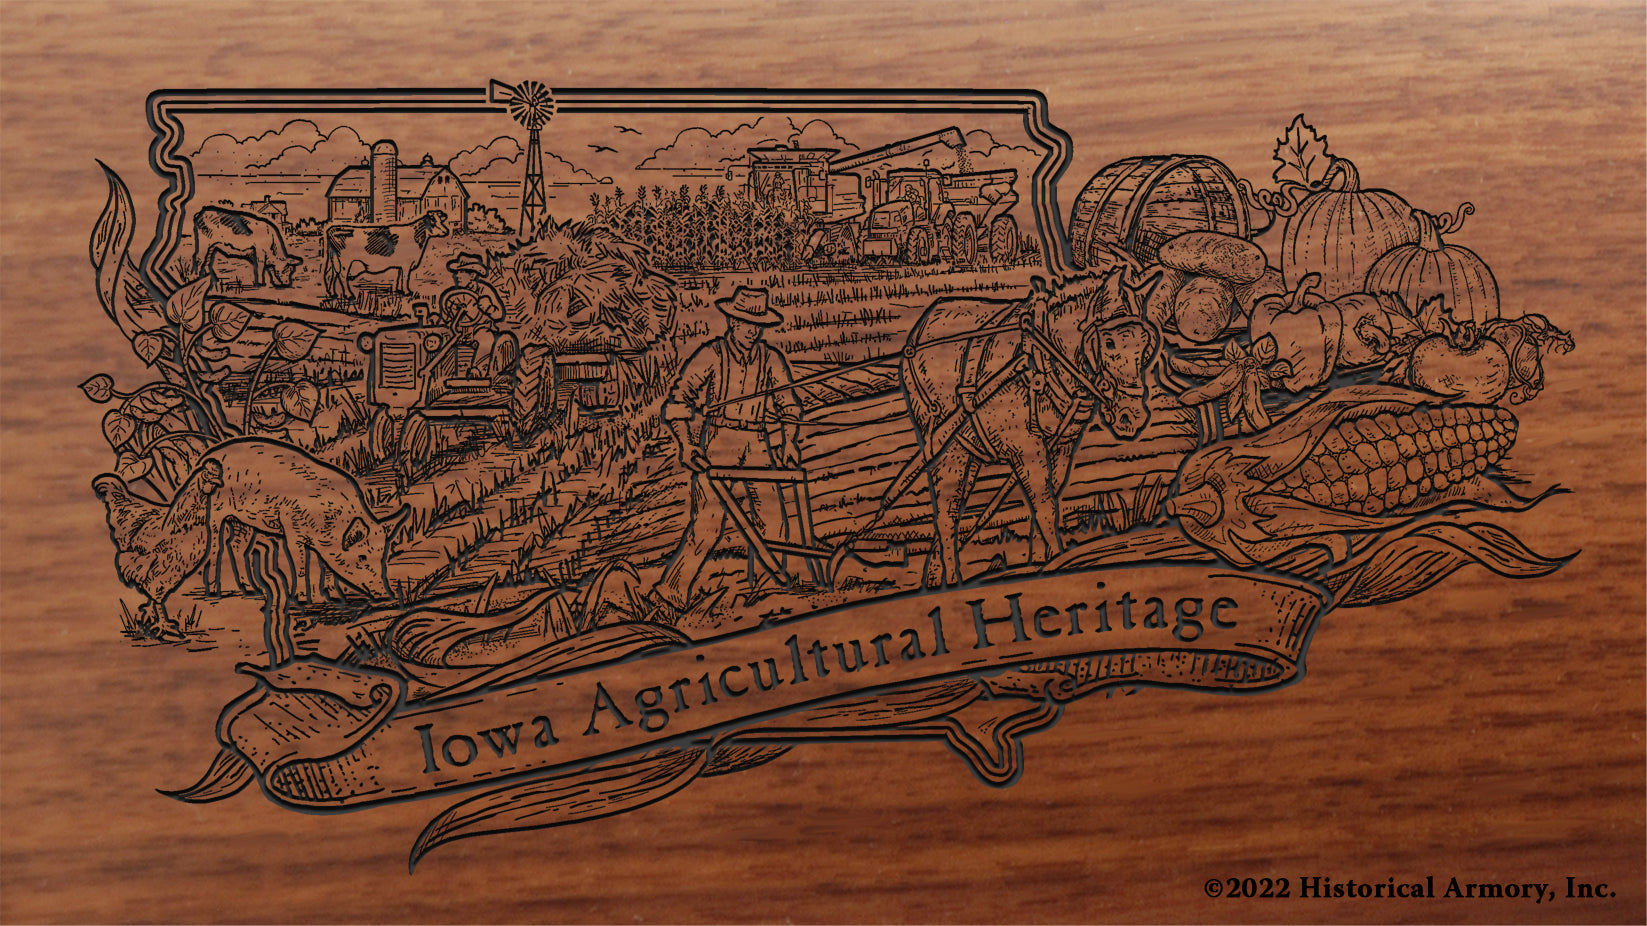 Iowa State Agricultural Heritage Engraved Rifle Buttstock Artwork